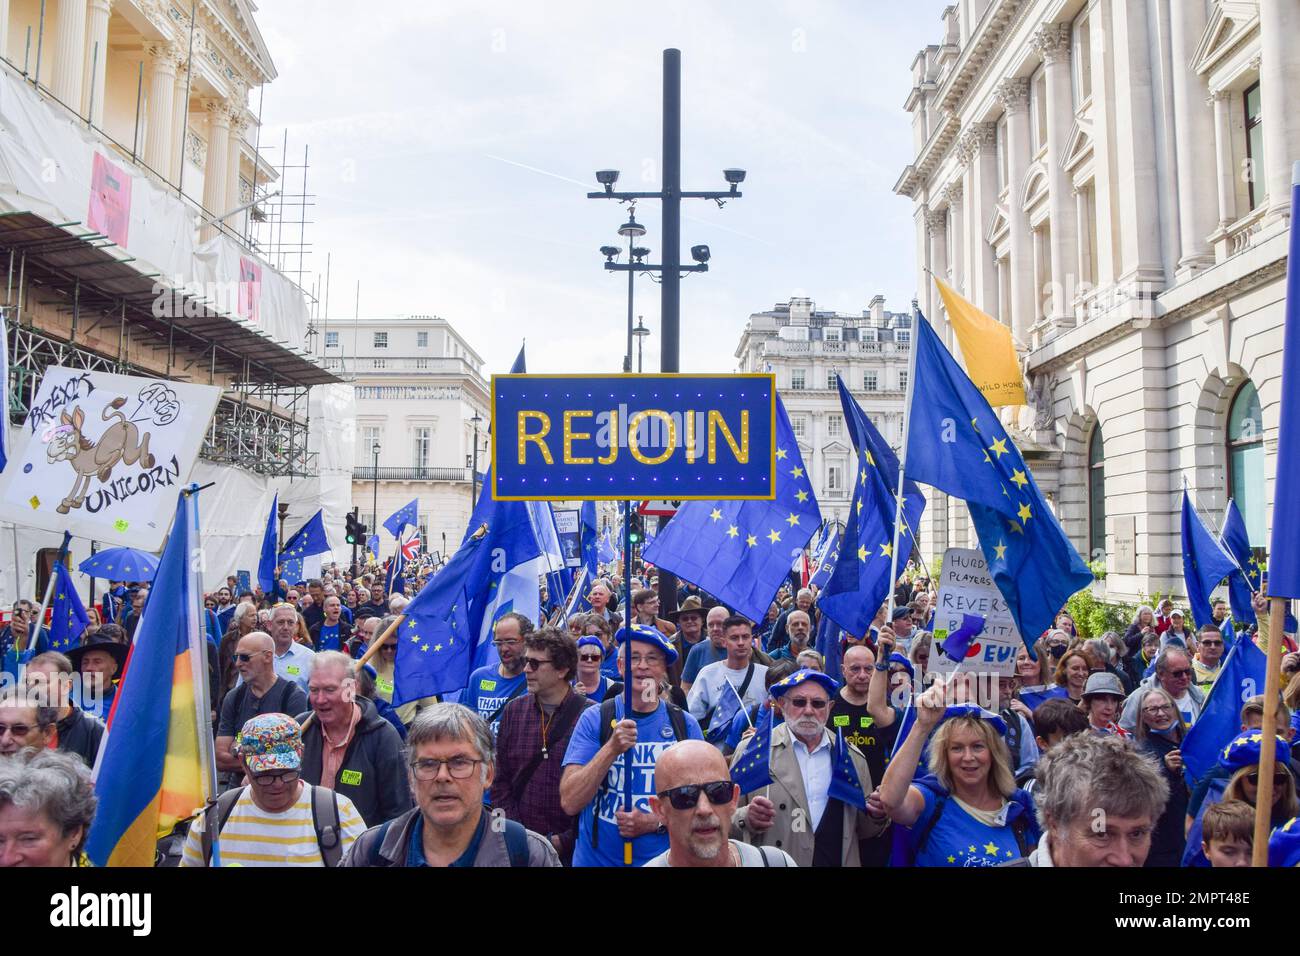 London, UK. 22nd October 2022. Thousands of people marched through central London demanding that the UK reverses Brexit and rejoins the European Union. Stock Photo